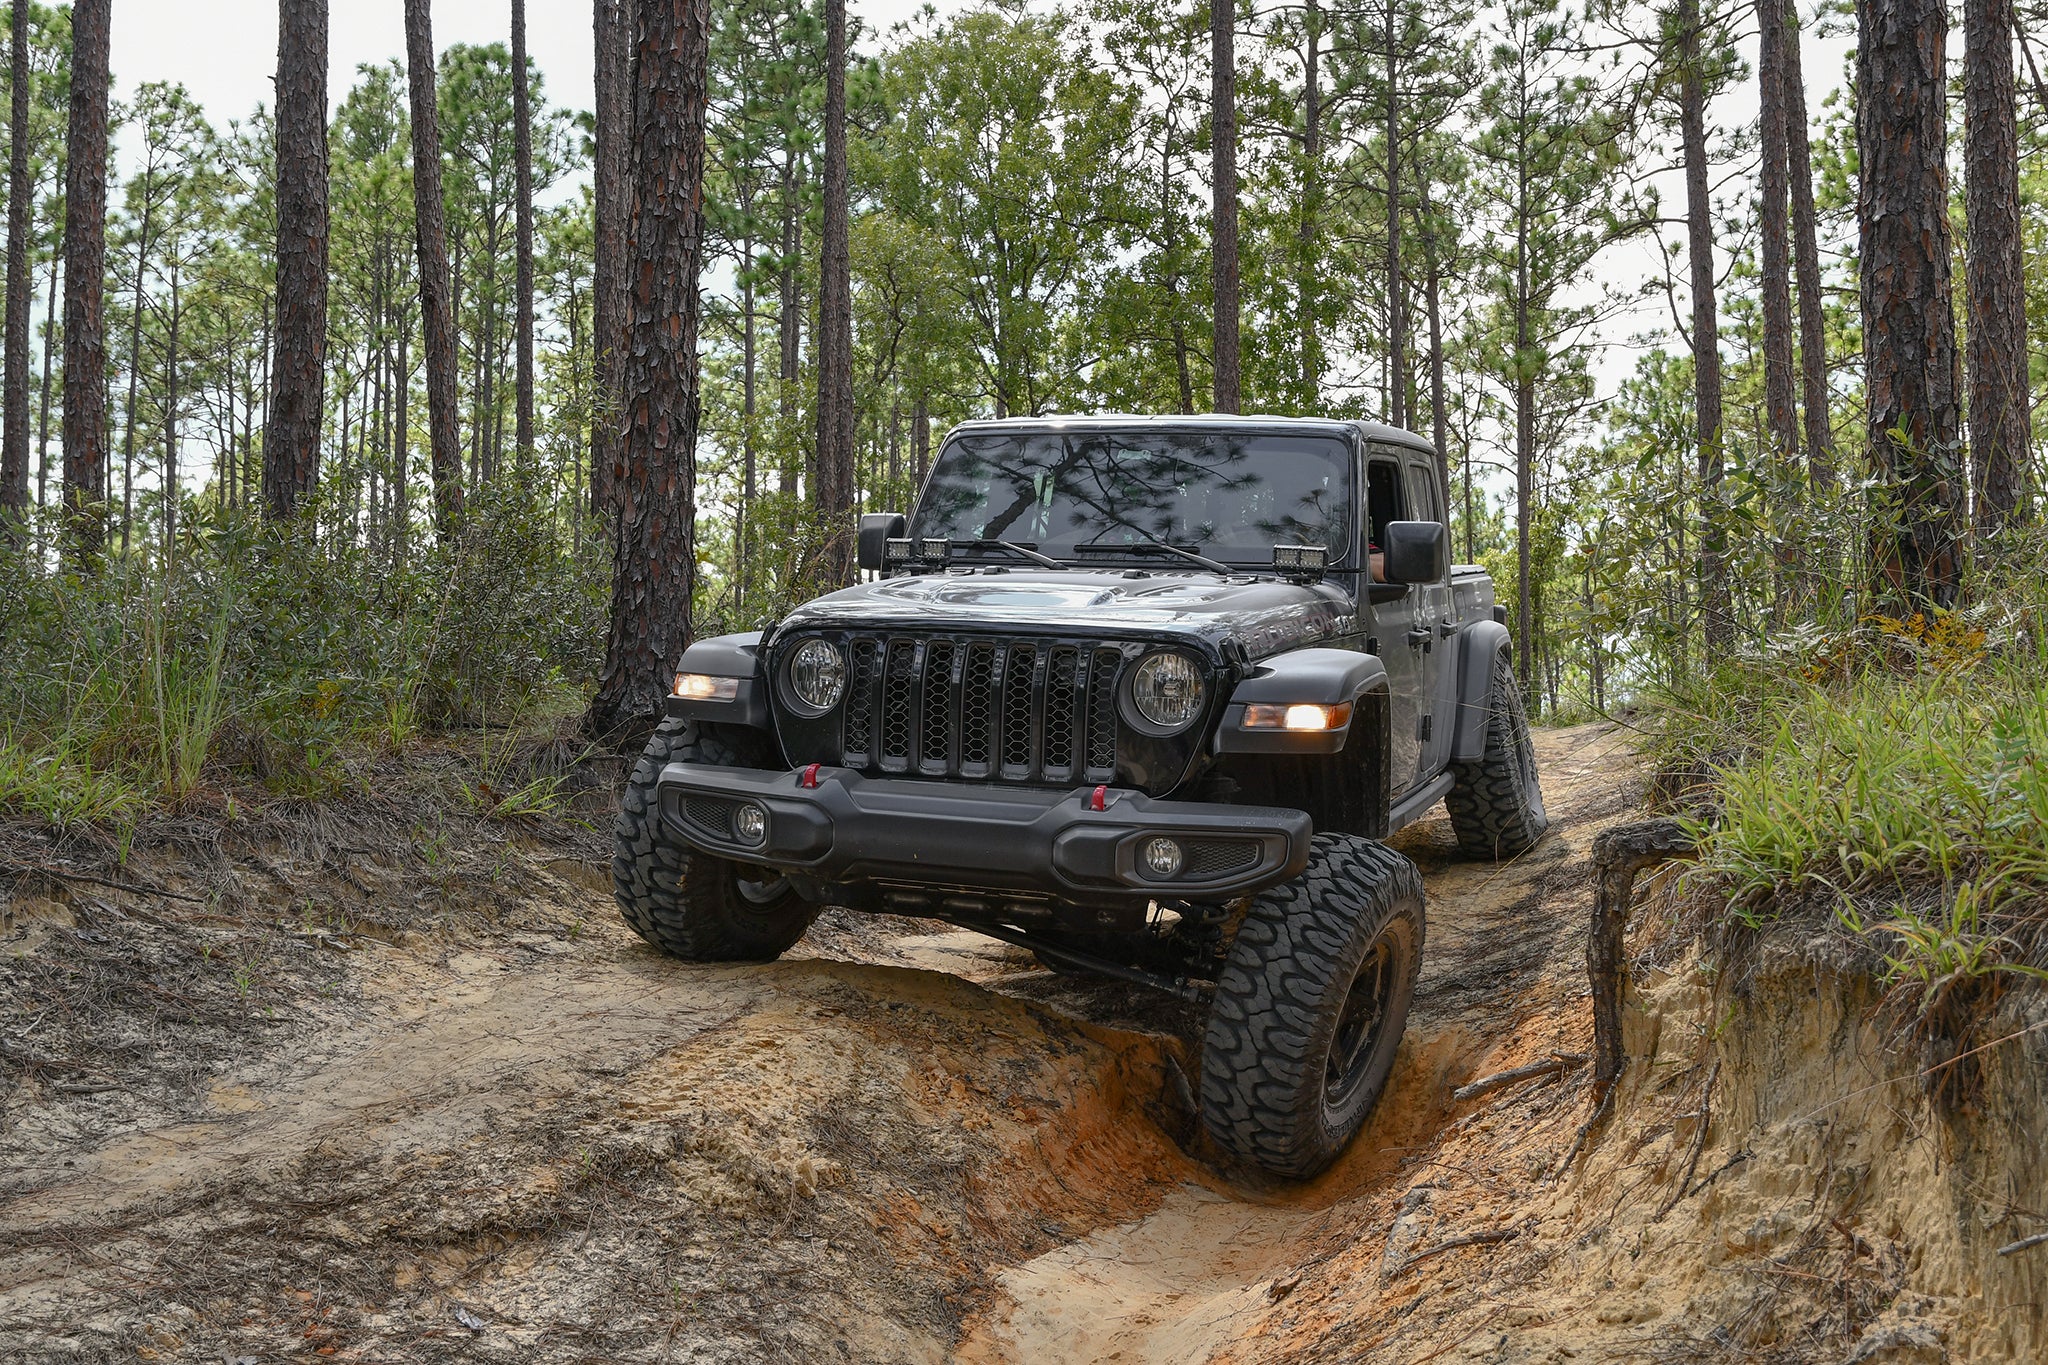 overland sector wheels jeep gladiator rubicon on 17x9 satin black atlas wheels in woods dirt trail